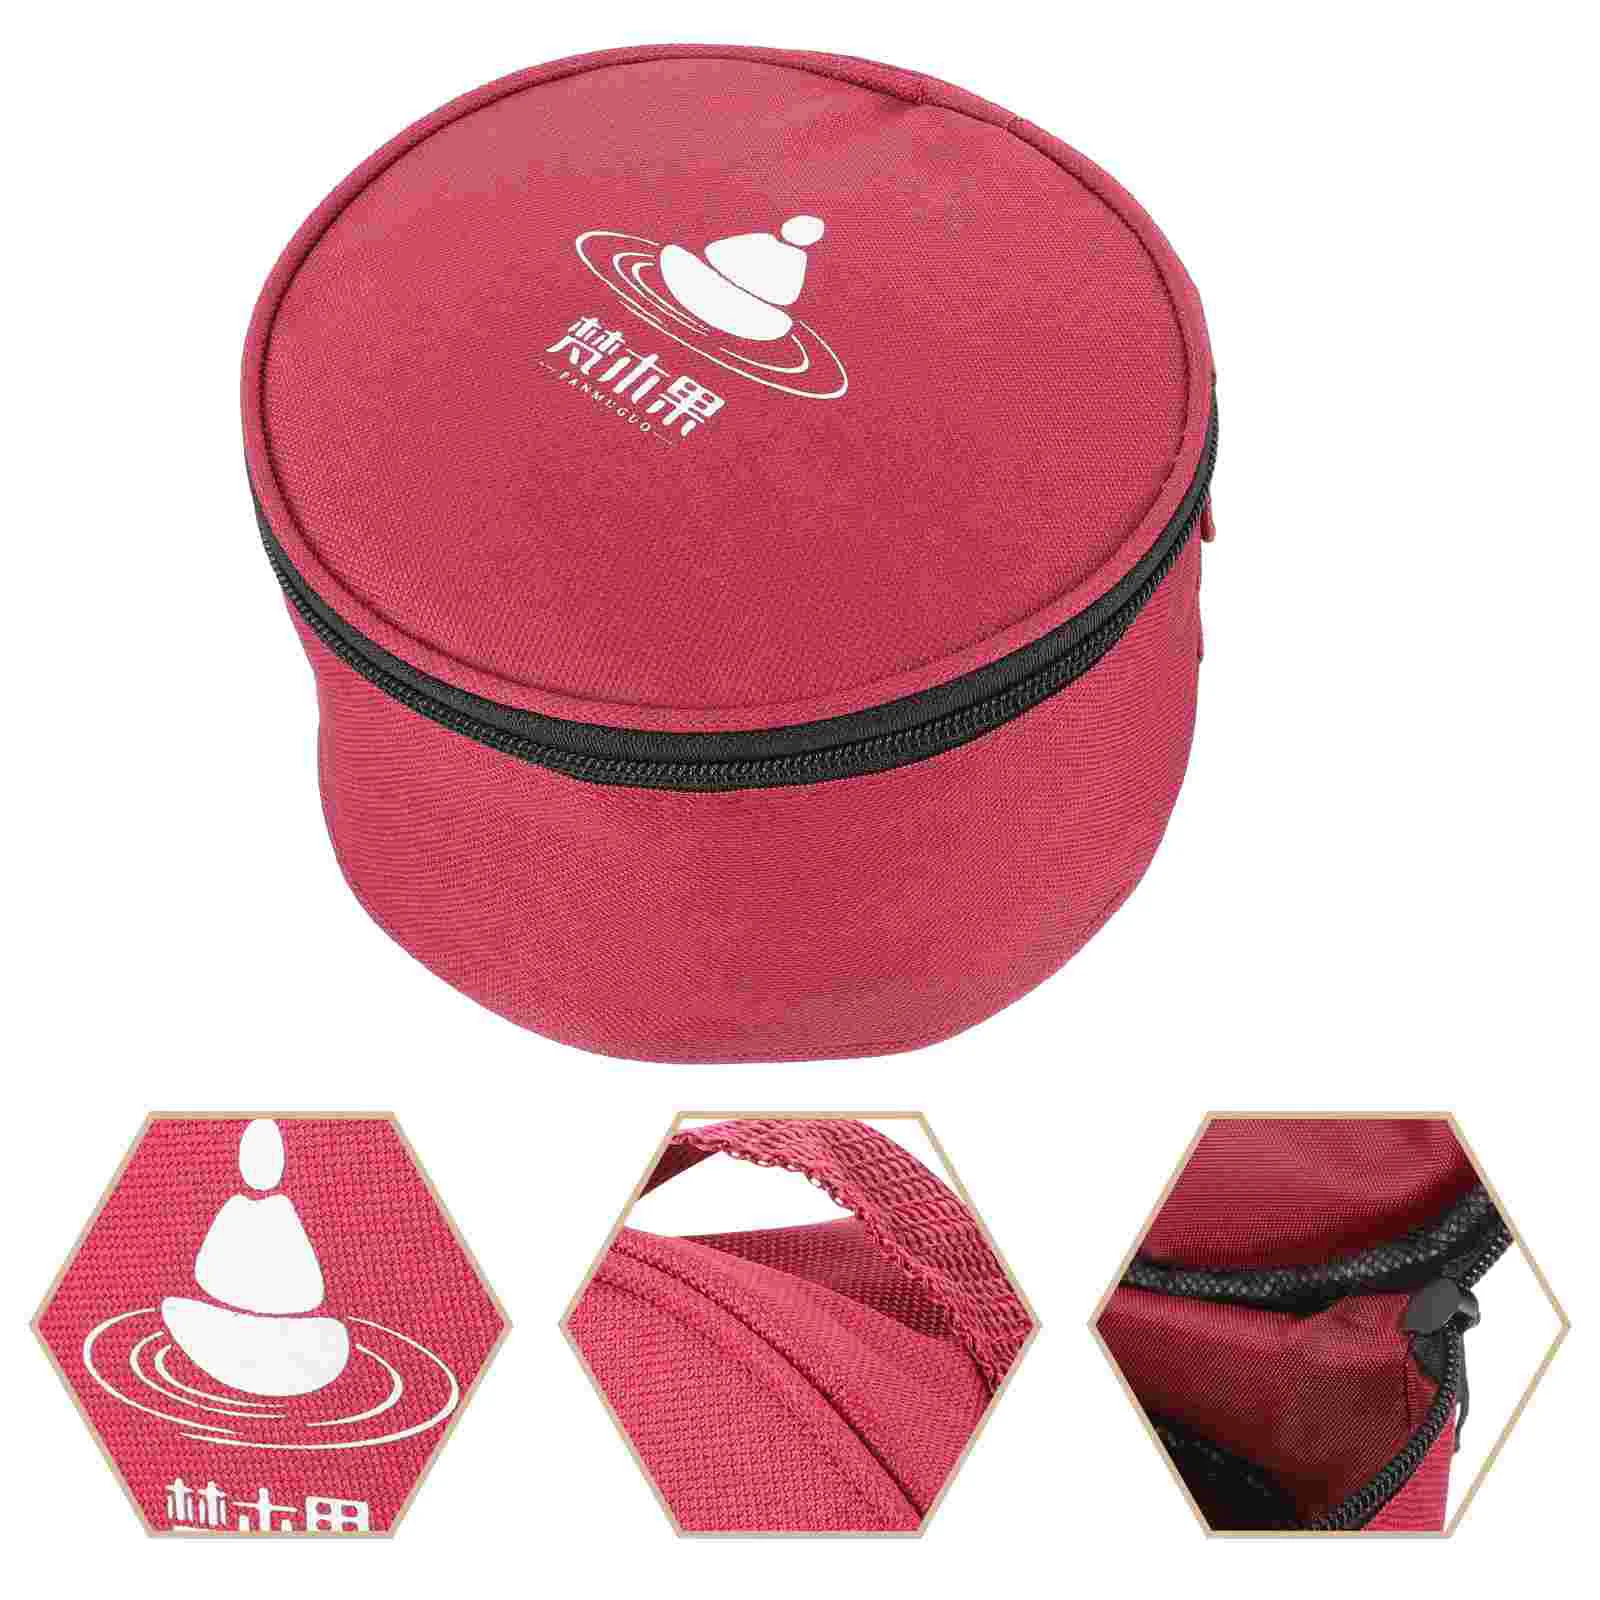 

Crystal Singing Bowl Padded Carry Case Bag Sound Carrying Storage Bags Suitcase